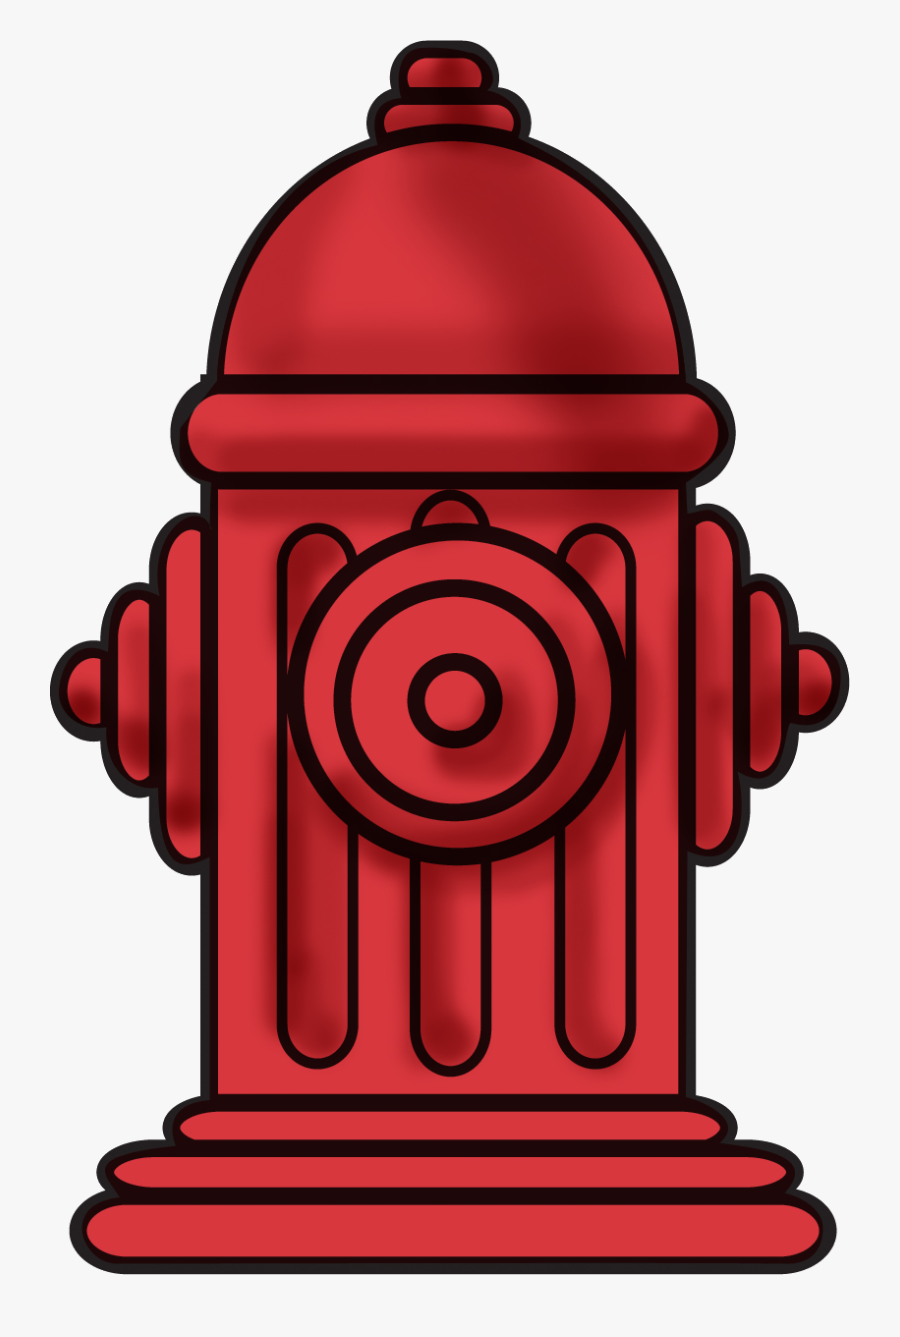 Fire Clipart Hydrant - Clip Art Fire Hydrant is a free transparent ba...